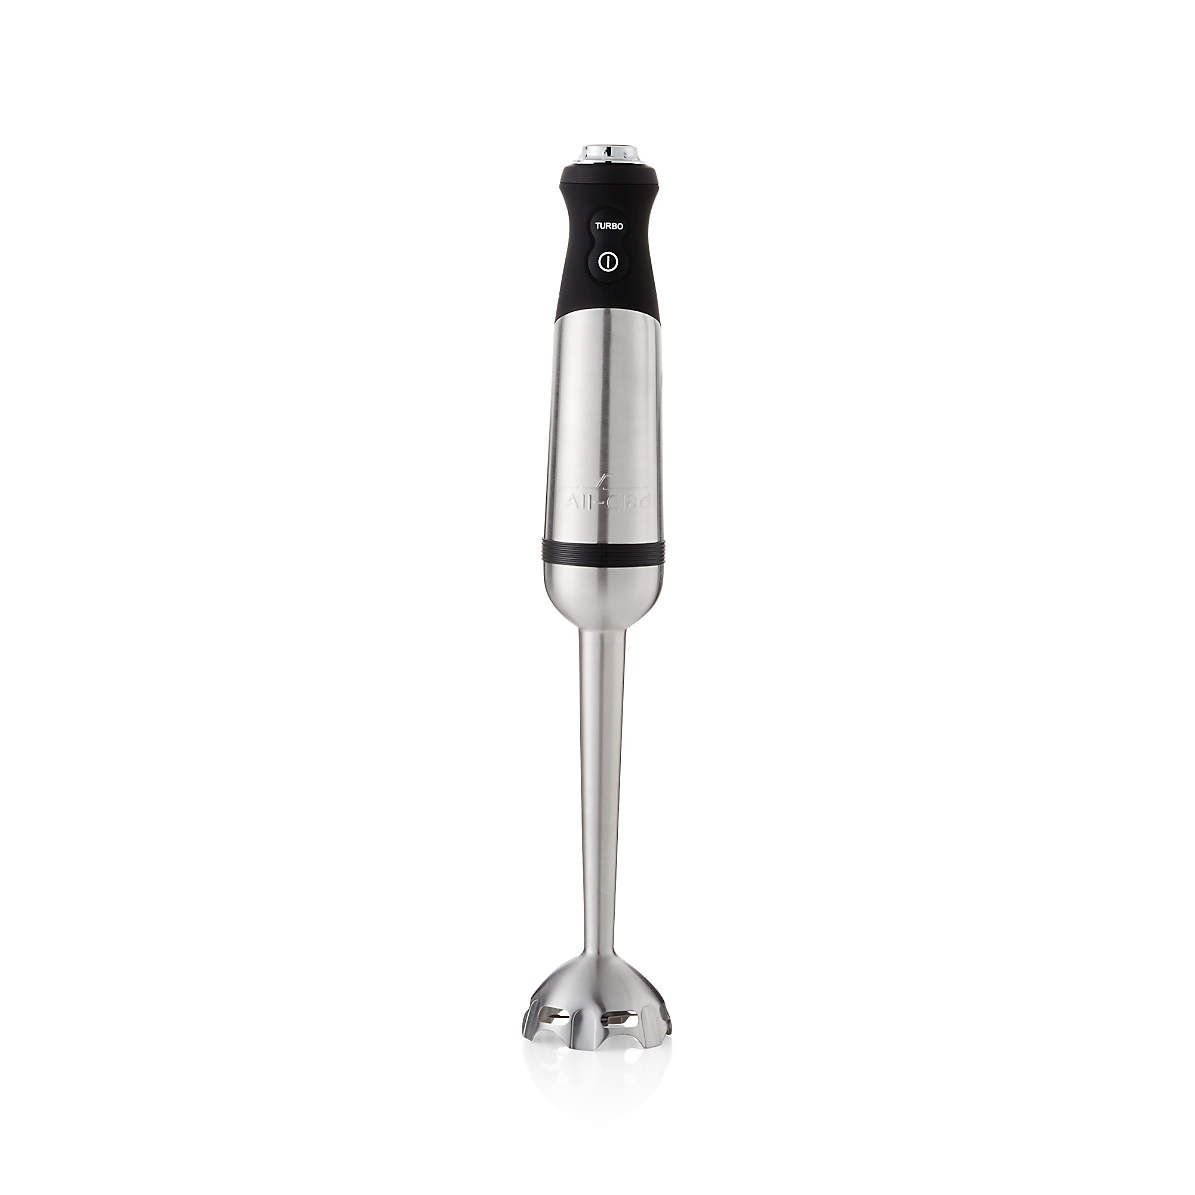  All-Clad Electrics Stainless Steel Immersion Blender 2 Piece  Turbo Function 600 Watts Detachable, Variable Speed Control, Hand Blander,  9-1/4-inch: Electric Hand Blenders: Home & Kitchen